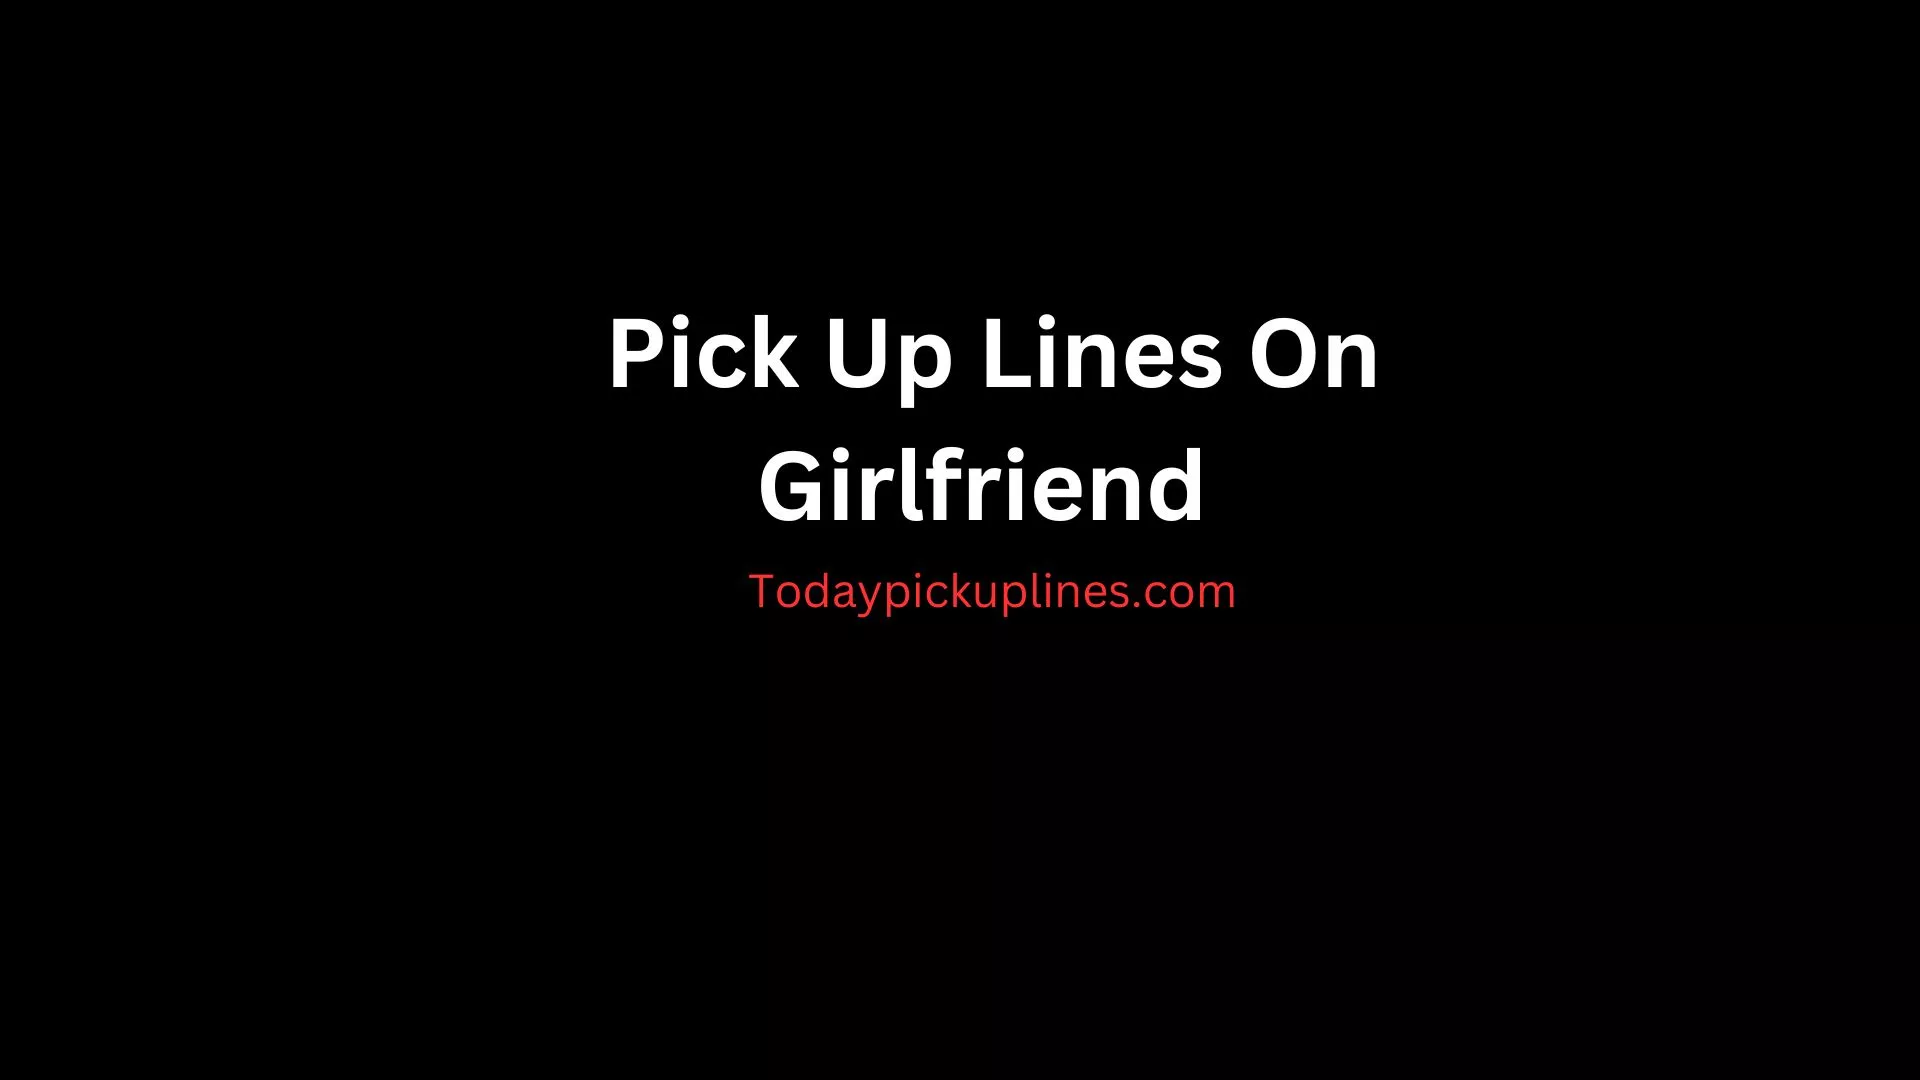 Pick Up Lines On Girlfriend